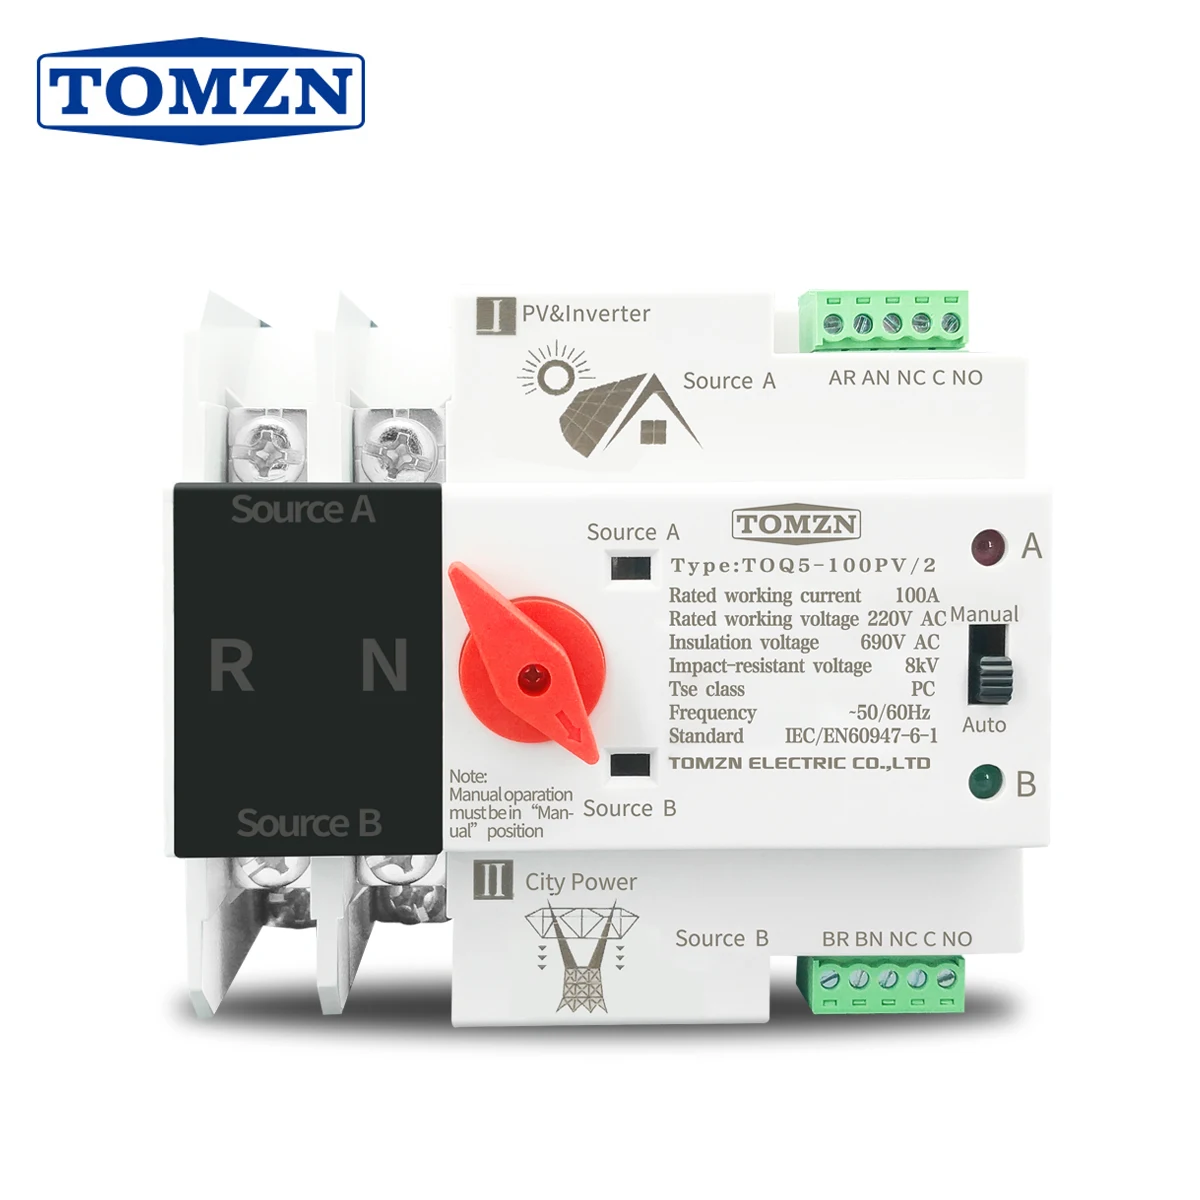 TOMZN Single Phase Din Rail ATS for PV inverter Dual Power Automatic Transfer Selector Switches Uninterrupted 2P 63A 100A 125A